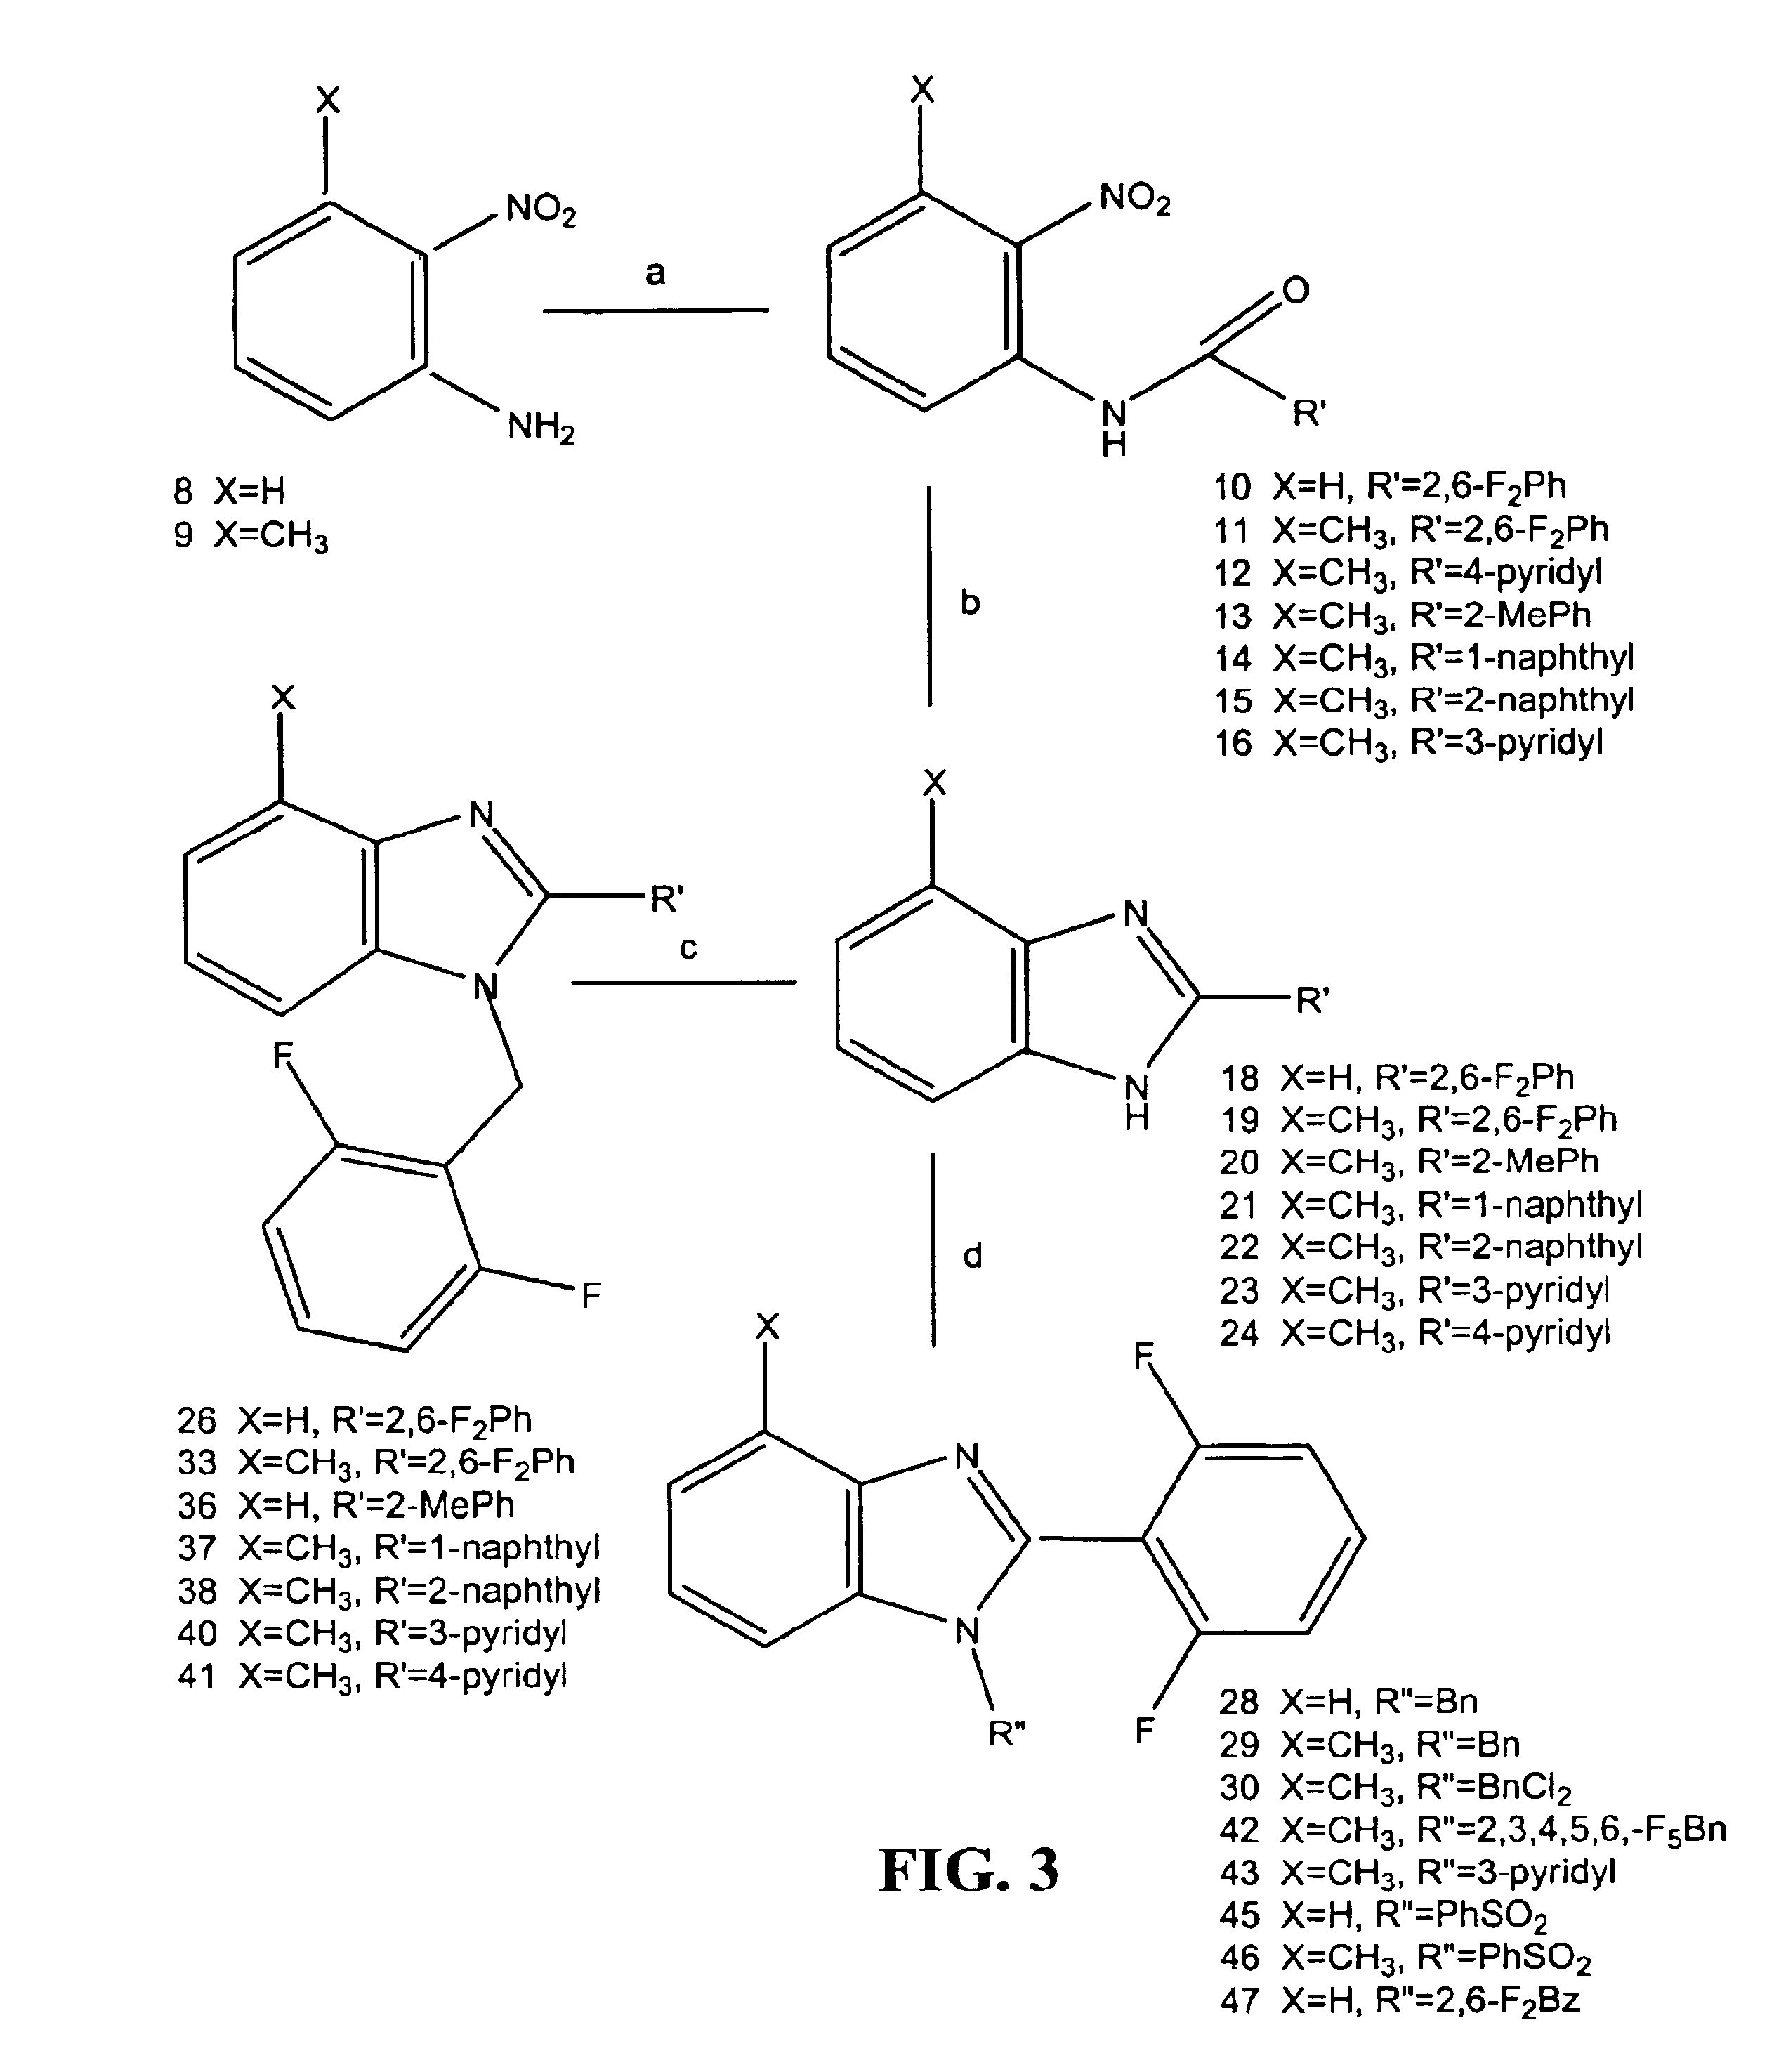 Substituted benzimidazoles as non-nucleoside inhibitors of reverse transcriptase